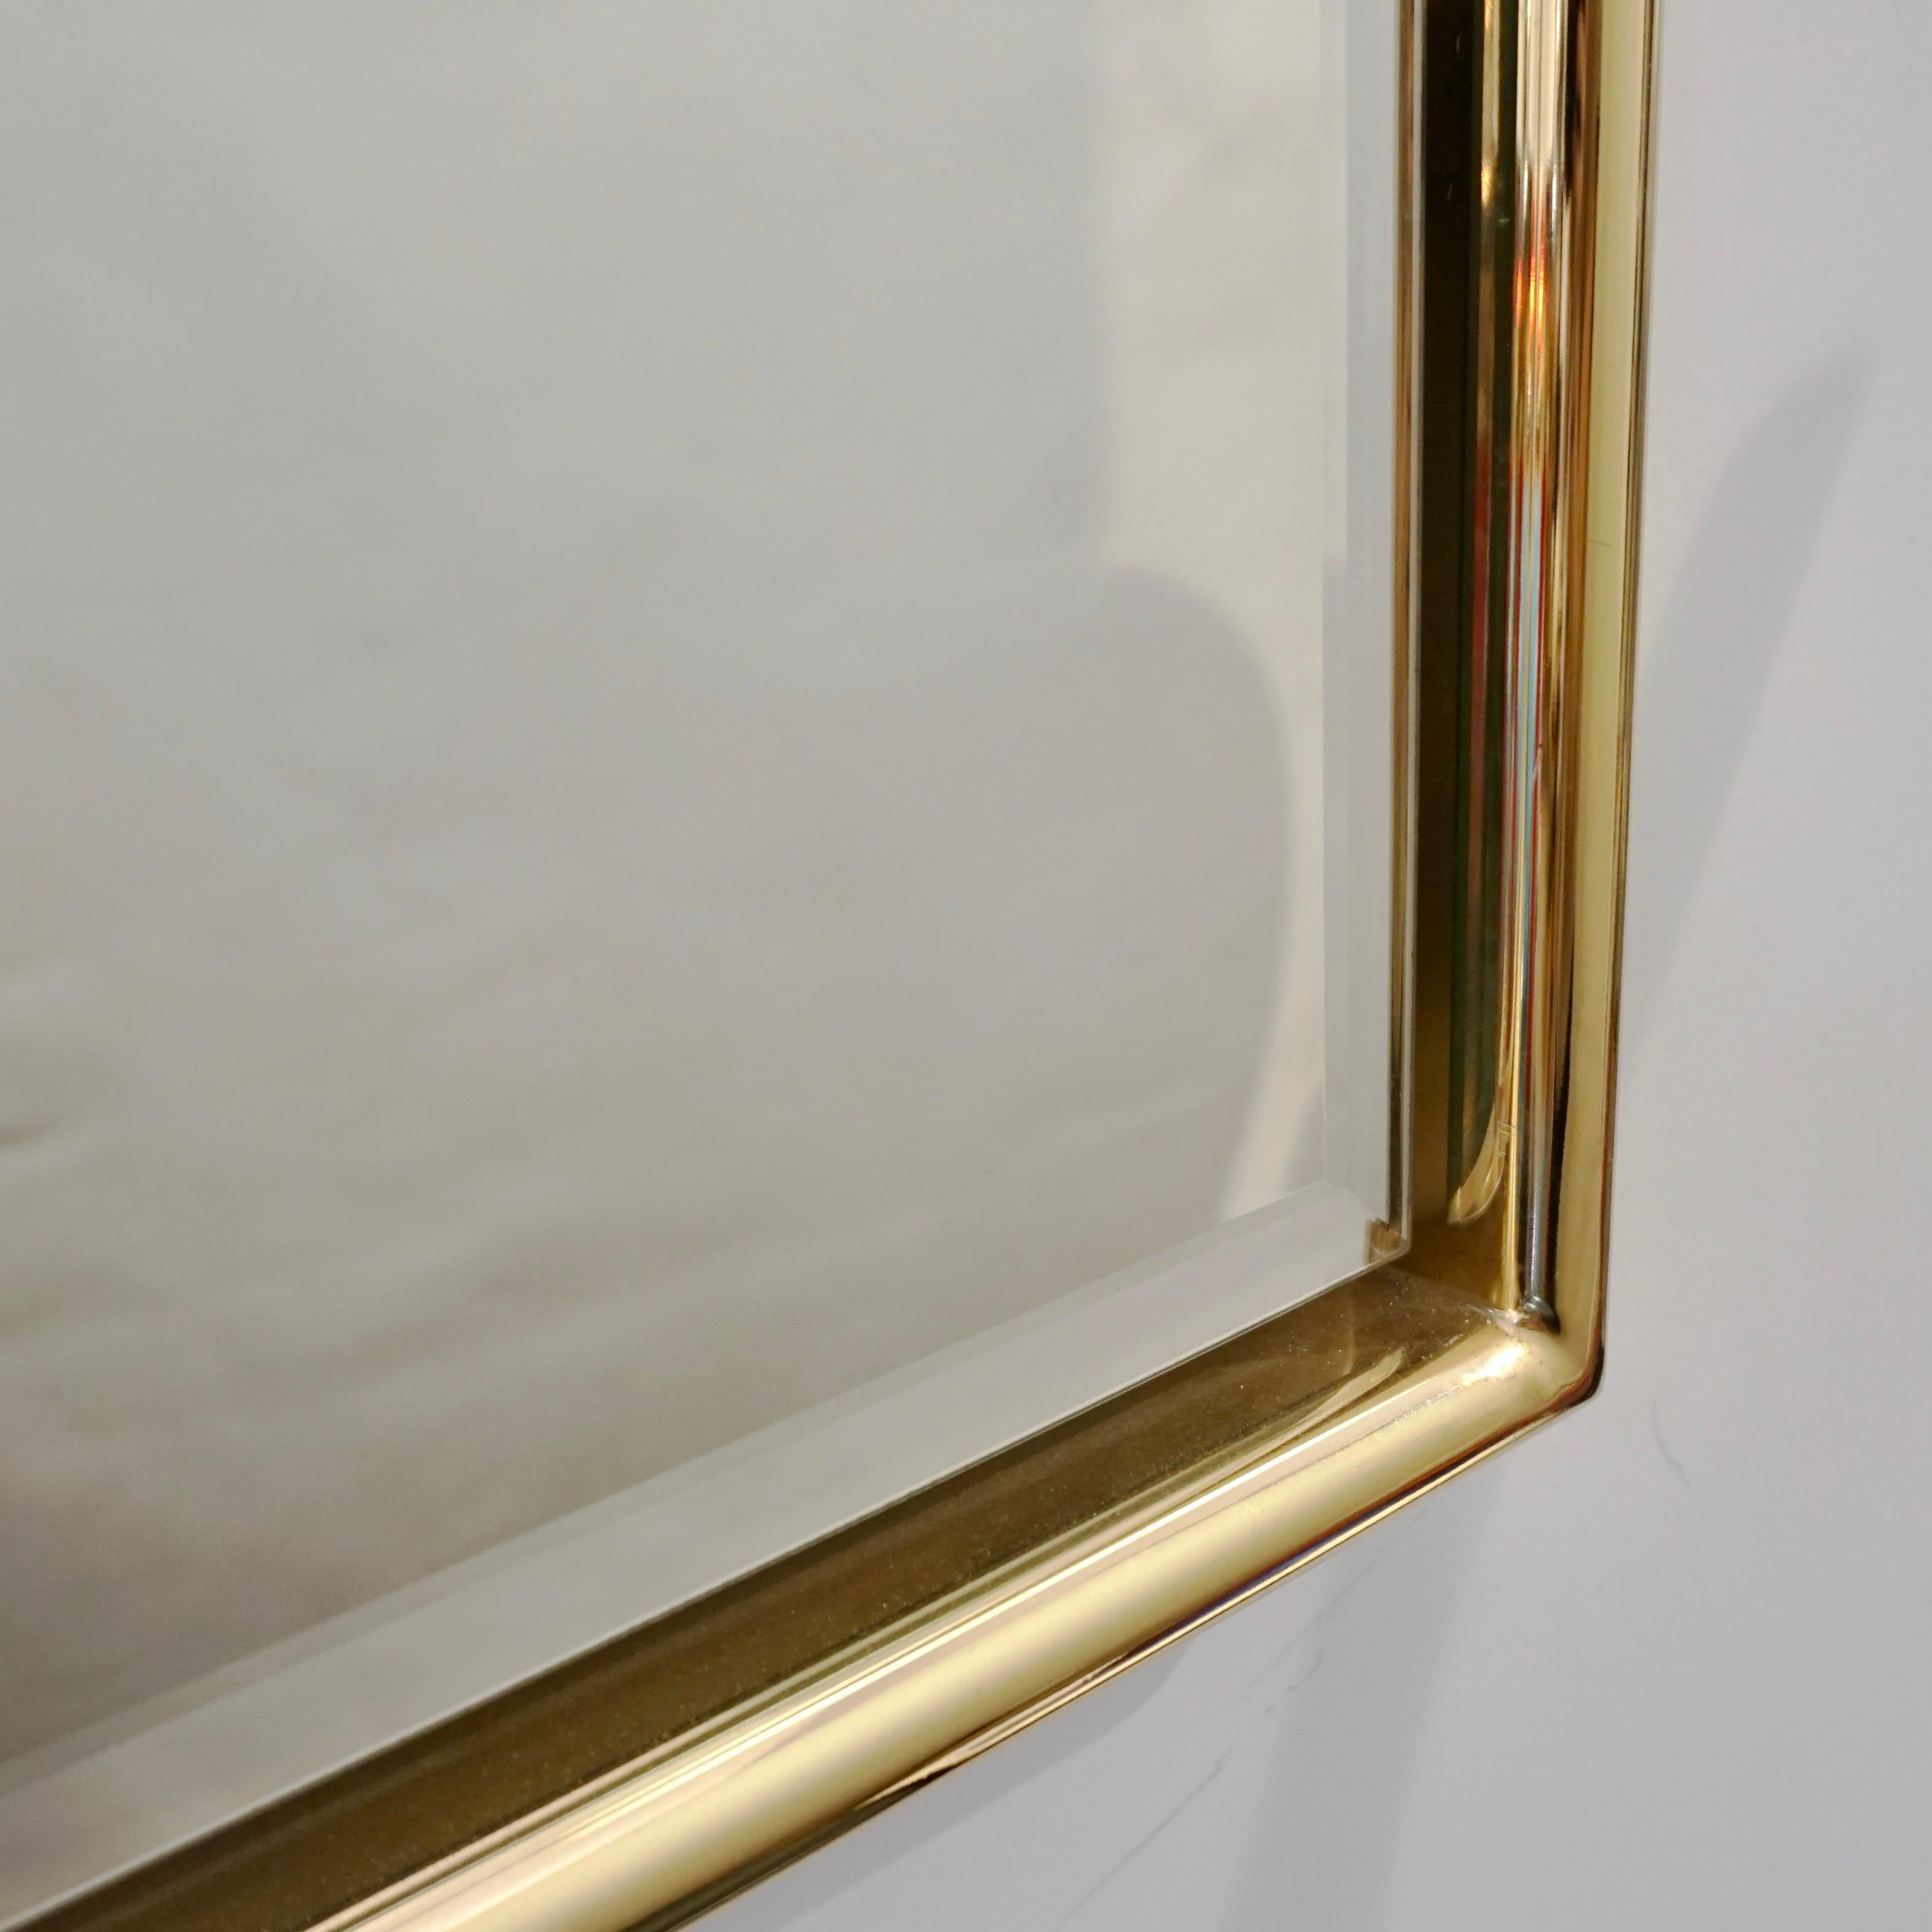 1960s Italian Minimalist Brass Floating Mirror with Round Arched Top Frame In Good Condition For Sale In New York, NY